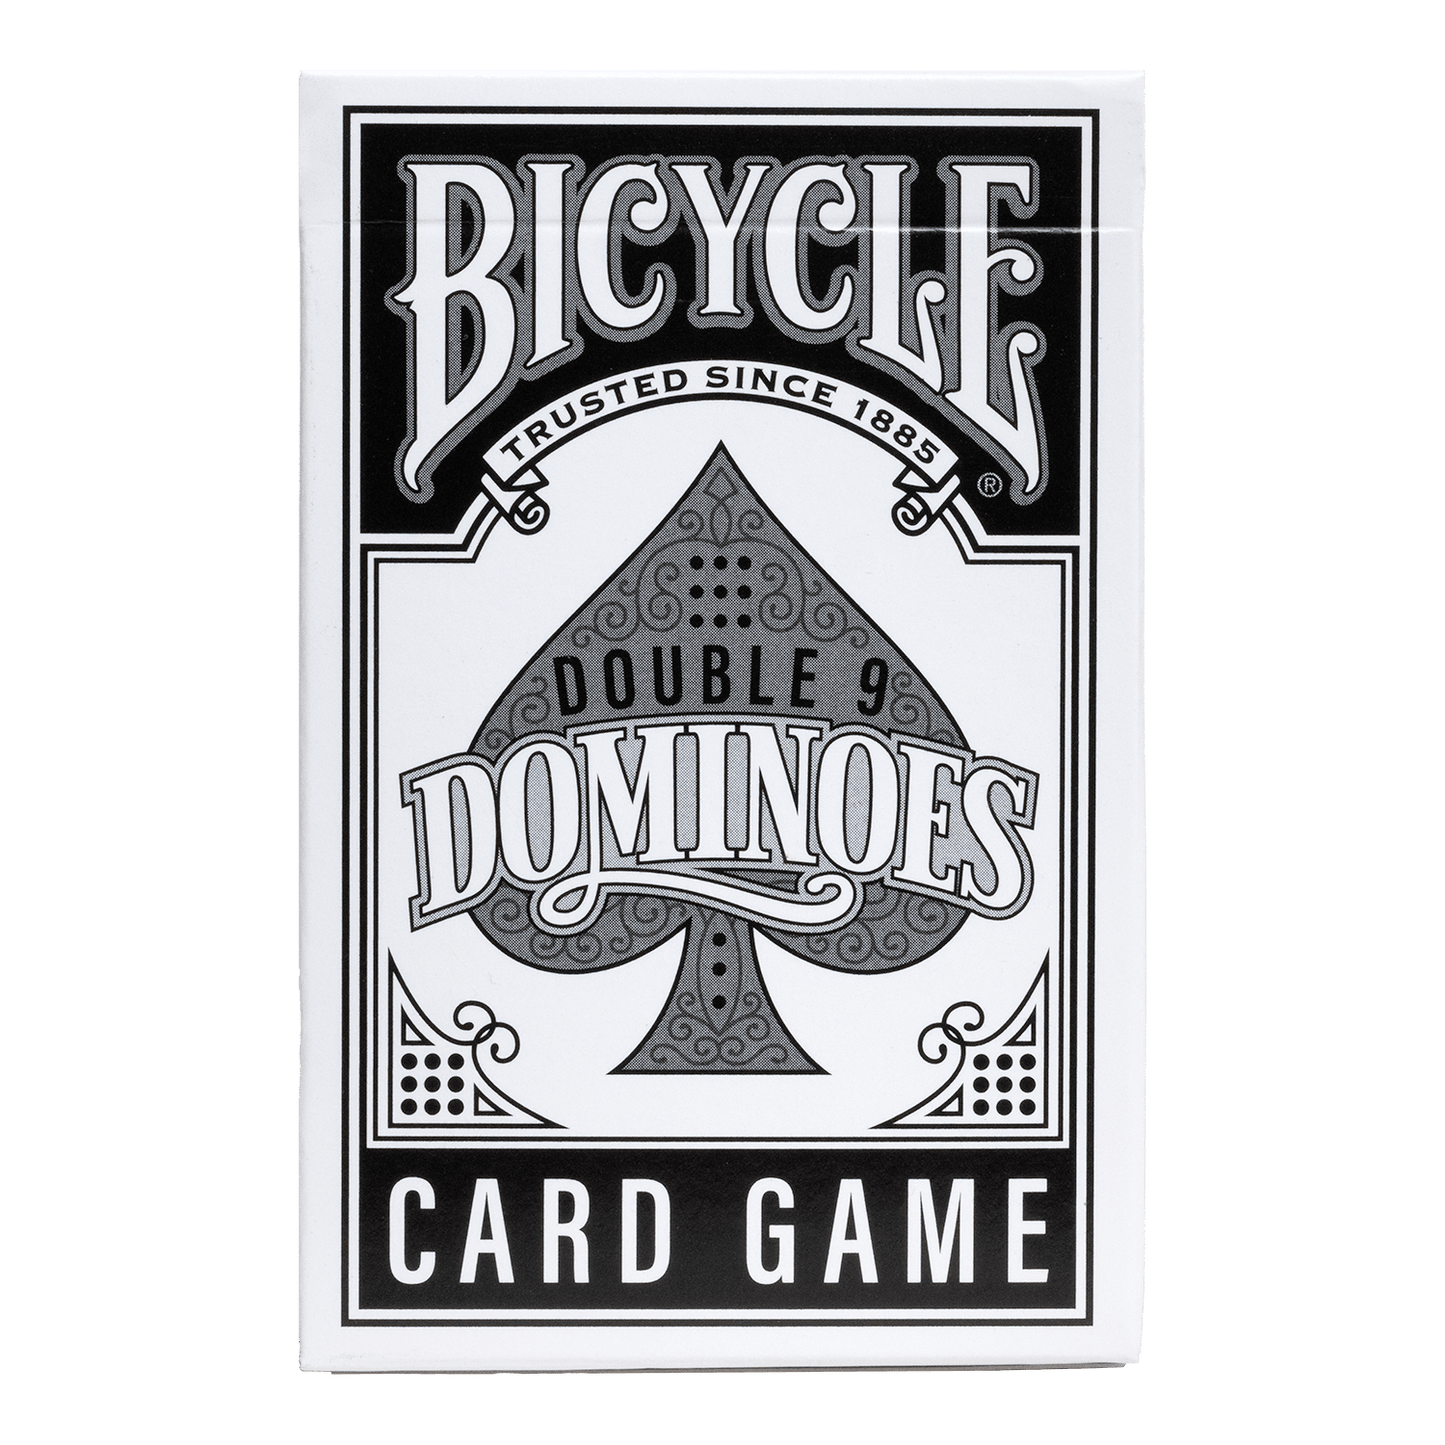 Double 9 Dominoes Cards by Bicycle